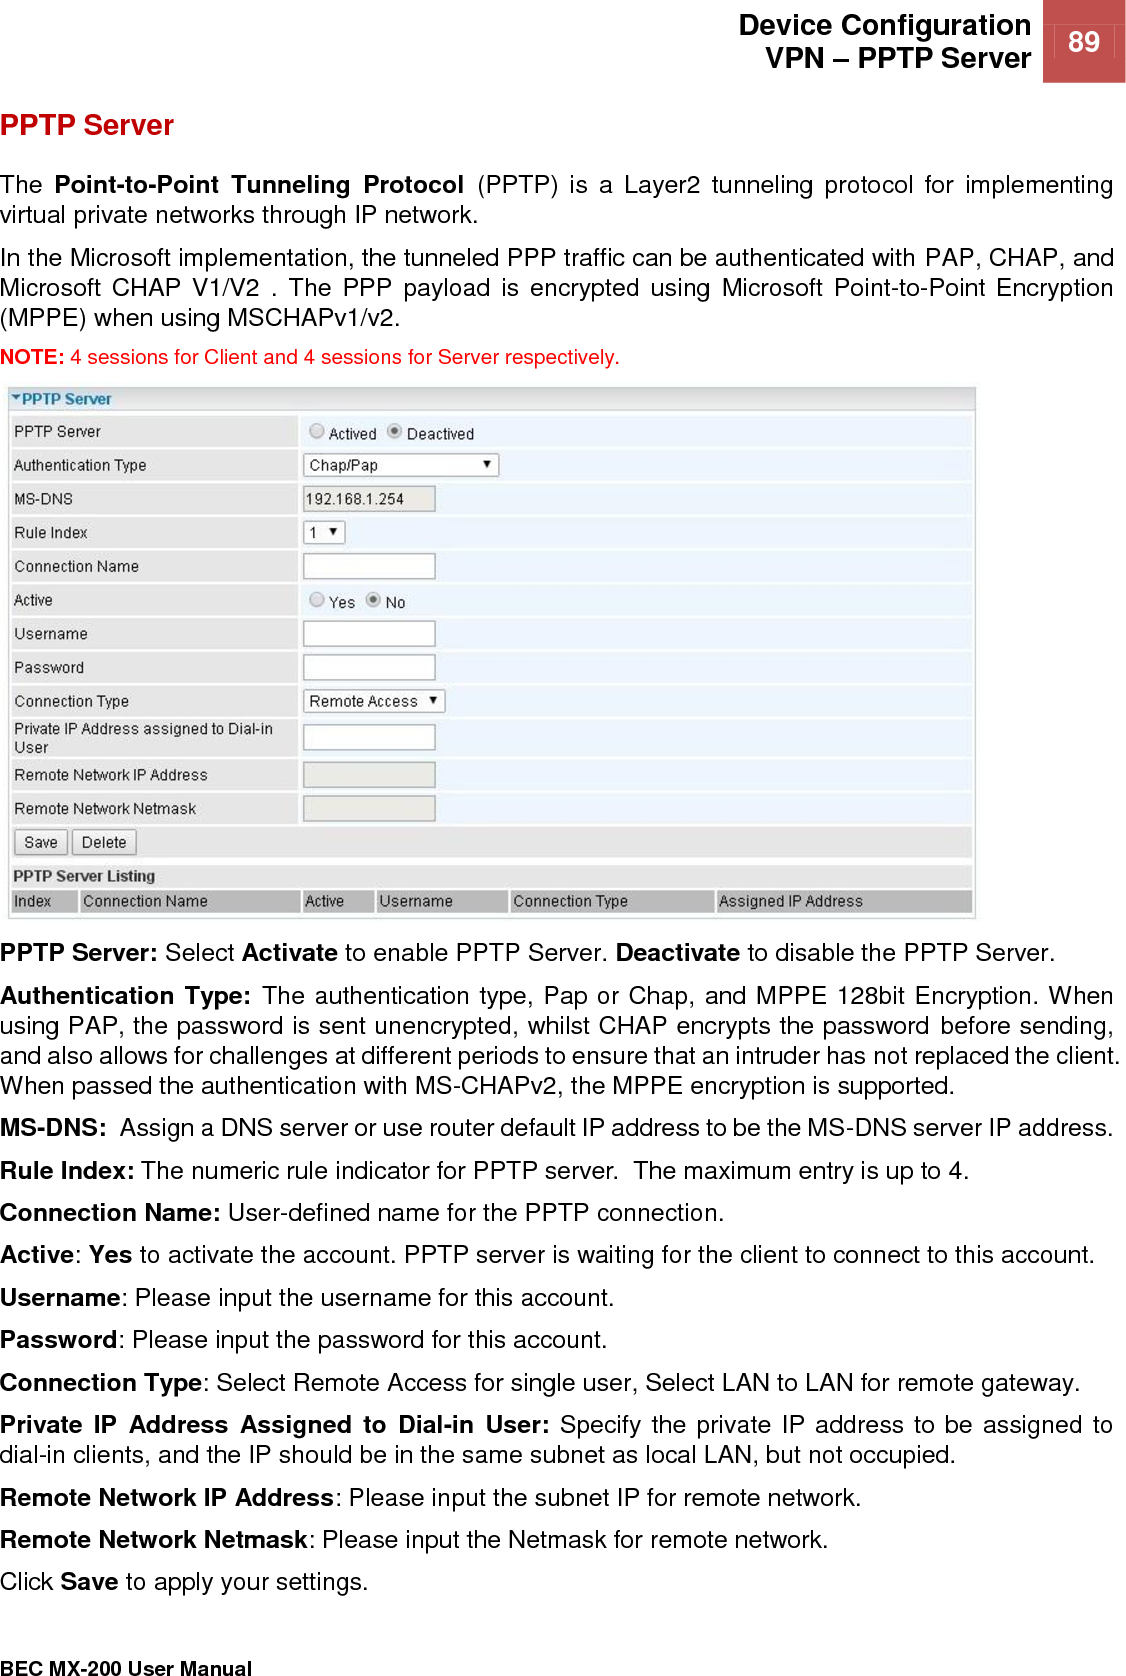  Device Configuration VPN – PPTP Server 89   BEC MX-200 User Manual  PPTP Server  The  Point-to-Point  Tunneling  Protocol  (PPTP)  is  a  Layer2  tunneling  protocol  for  implementing virtual private networks through IP network. In the Microsoft implementation, the tunneled PPP traffic can be authenticated with PAP, CHAP, and Microsoft  CHAP V1/V2 .  The PPP  payload  is encrypted  using  Microsoft  Point-to-Point Encryption (MPPE) when using MSCHAPv1/v2. NOTE: 4 sessions for Client and 4 sessions for Server respectively.  PPTP Server: Select Activate to enable PPTP Server. Deactivate to disable the PPTP Server. Authentication Type: The authentication type, Pap or Chap, and MPPE 128bit Encryption. When using PAP, the password is sent unencrypted, whilst CHAP encrypts the password before sending, and also allows for challenges at different periods to ensure that an intruder has not replaced the client. When passed the authentication with MS-CHAPv2, the MPPE encryption is supported. MS-DNS:  Assign a DNS server or use router default IP address to be the MS-DNS server IP address. Rule Index: The numeric rule indicator for PPTP server.  The maximum entry is up to 4. Connection Name: User-defined name for the PPTP connection. Active: Yes to activate the account. PPTP server is waiting for the client to connect to this account. Username: Please input the username for this account. Password: Please input the password for this account. Connection Type: Select Remote Access for single user, Select LAN to LAN for remote gateway. Private IP  Address  Assigned  to Dial-in  User: Specify the private IP address to be assigned to dial-in clients, and the IP should be in the same subnet as local LAN, but not occupied. Remote Network IP Address: Please input the subnet IP for remote network. Remote Network Netmask: Please input the Netmask for remote network. Click Save to apply your settings.